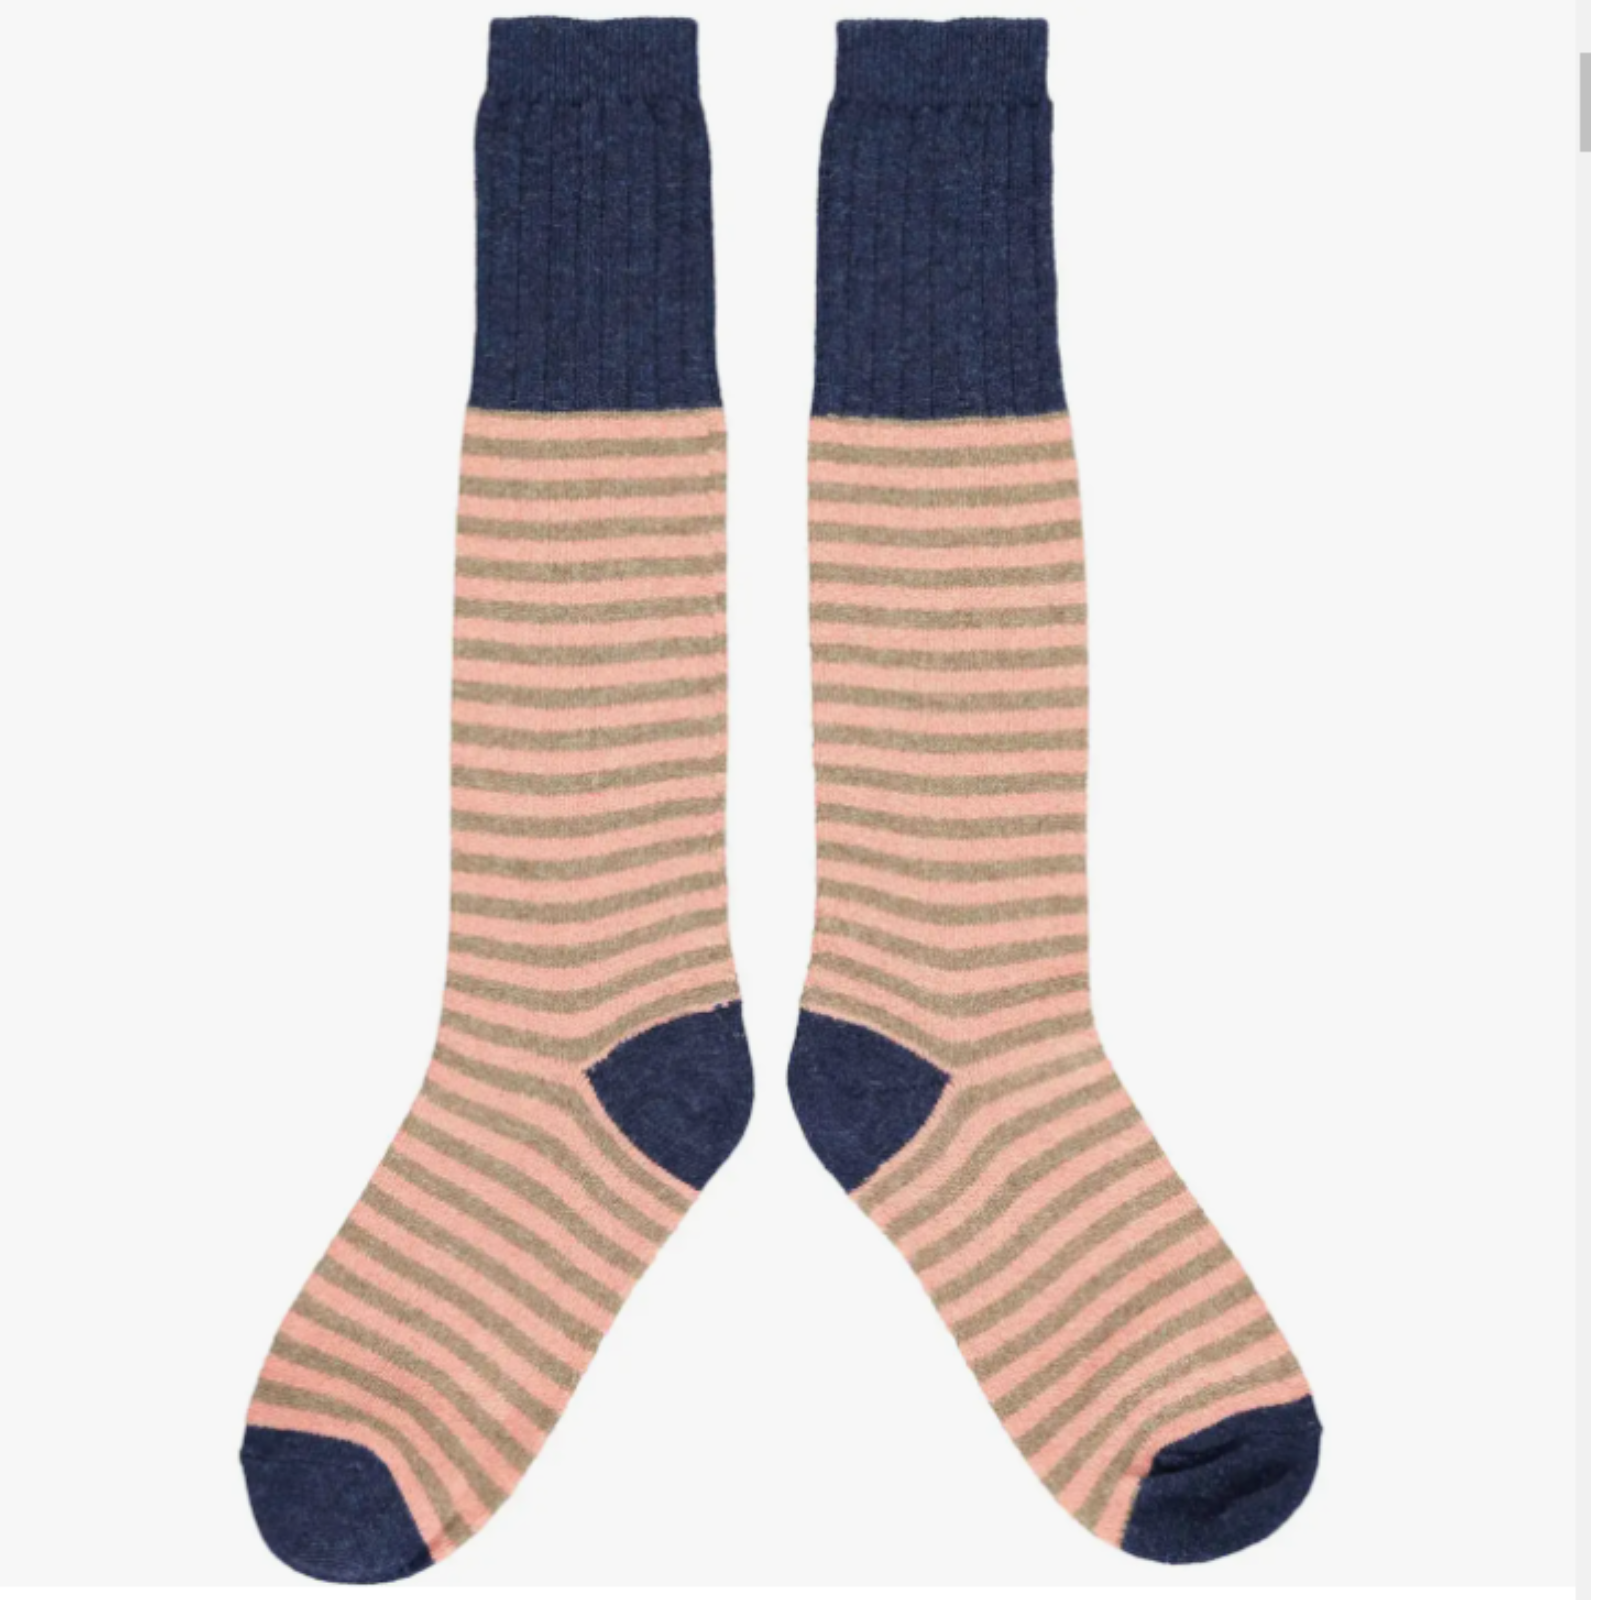 Catherine Tough women's lambswool knee socks featuring salmon pink and taupe stripes with navy blue cuffs, heels, and toes.